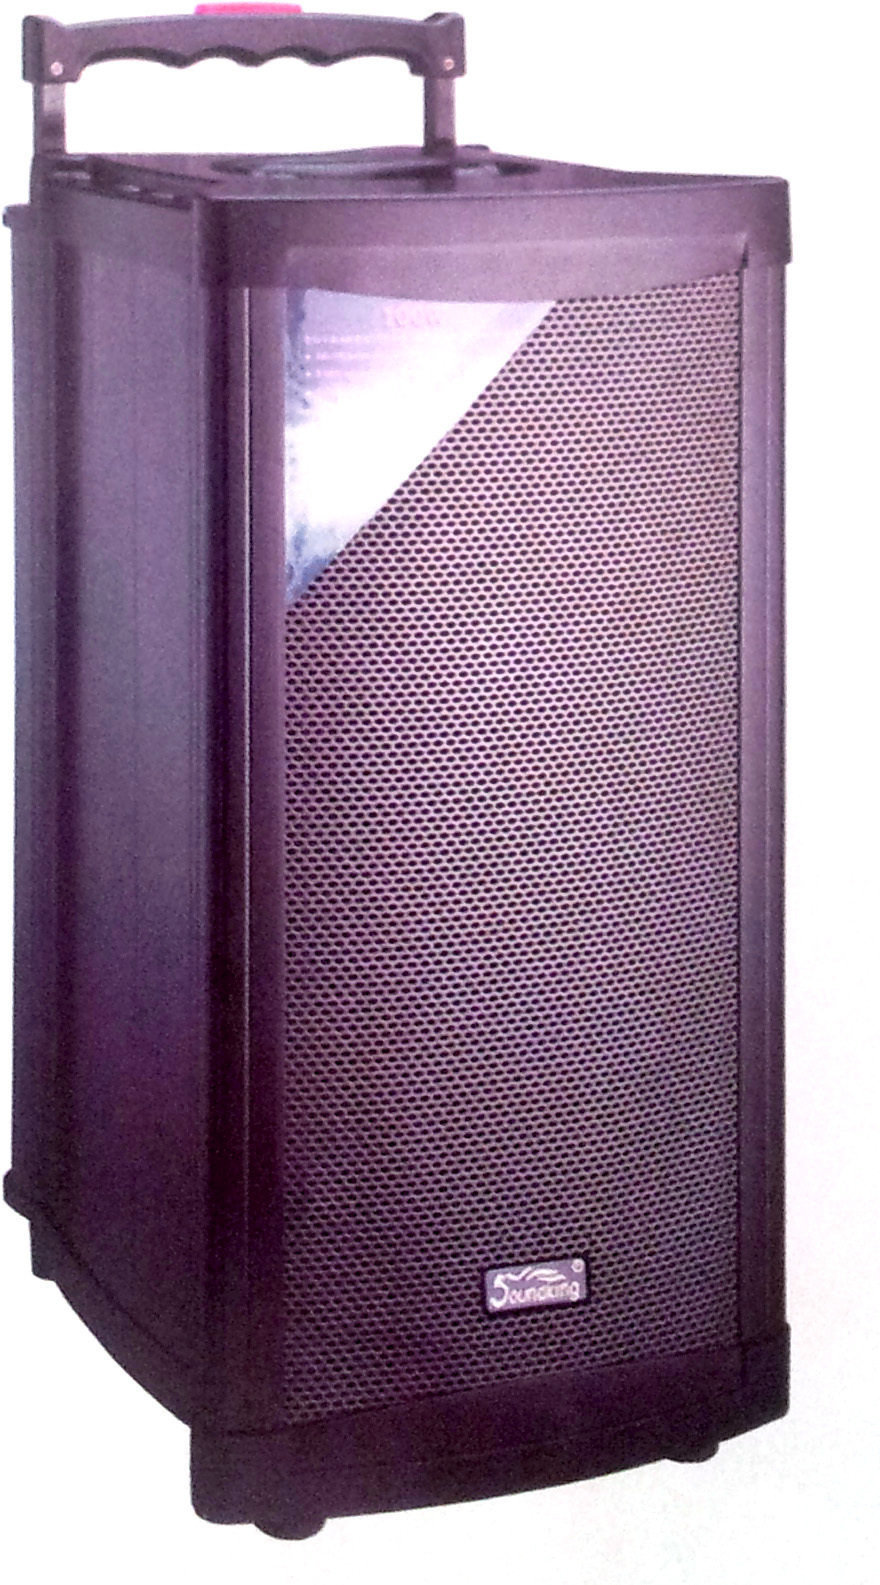 Battery powered PA system Soundking W208PAD